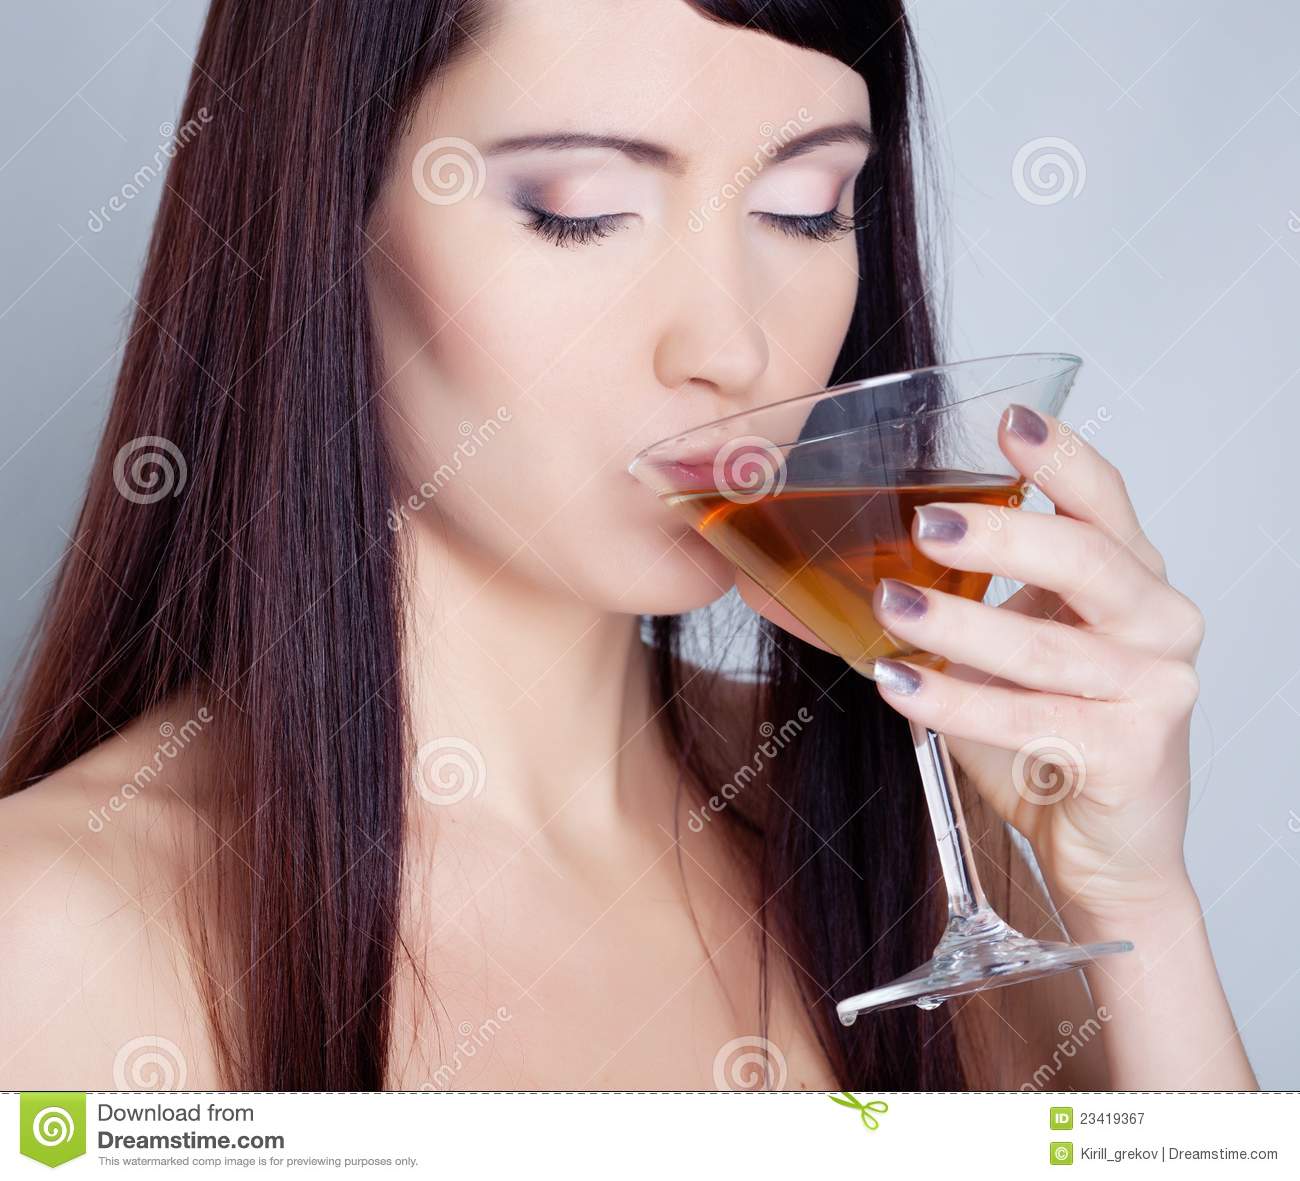 Girl Drinking Wine Royalty Free Stock Photography   Image  23419367